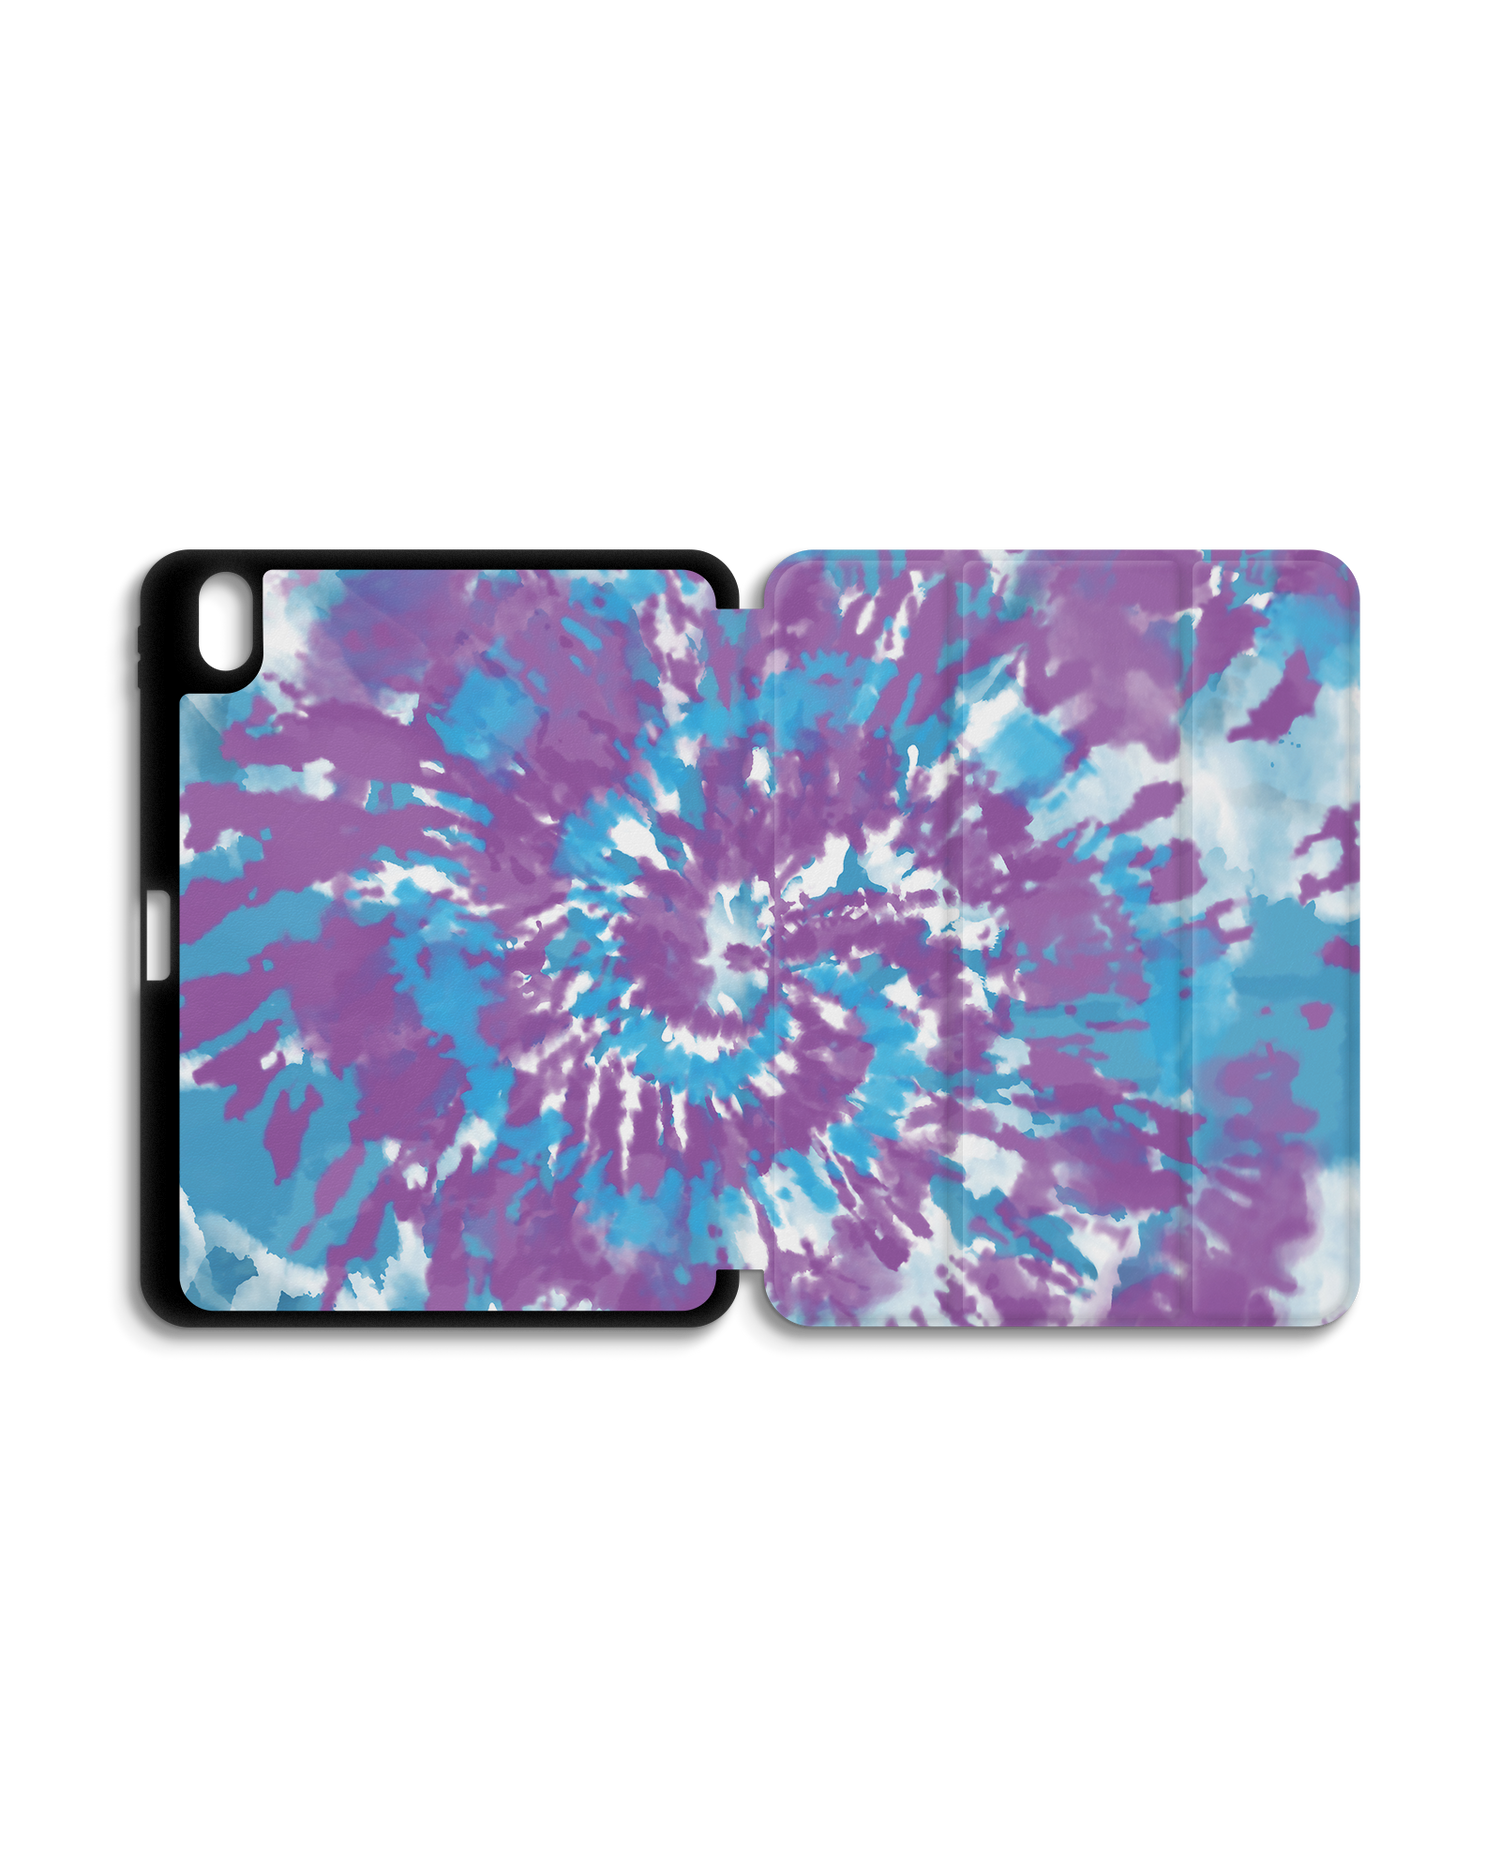 Classic Tie Dye iPad Case with Pencil Holder for Apple iPad (10th Generation): Opened exterior view